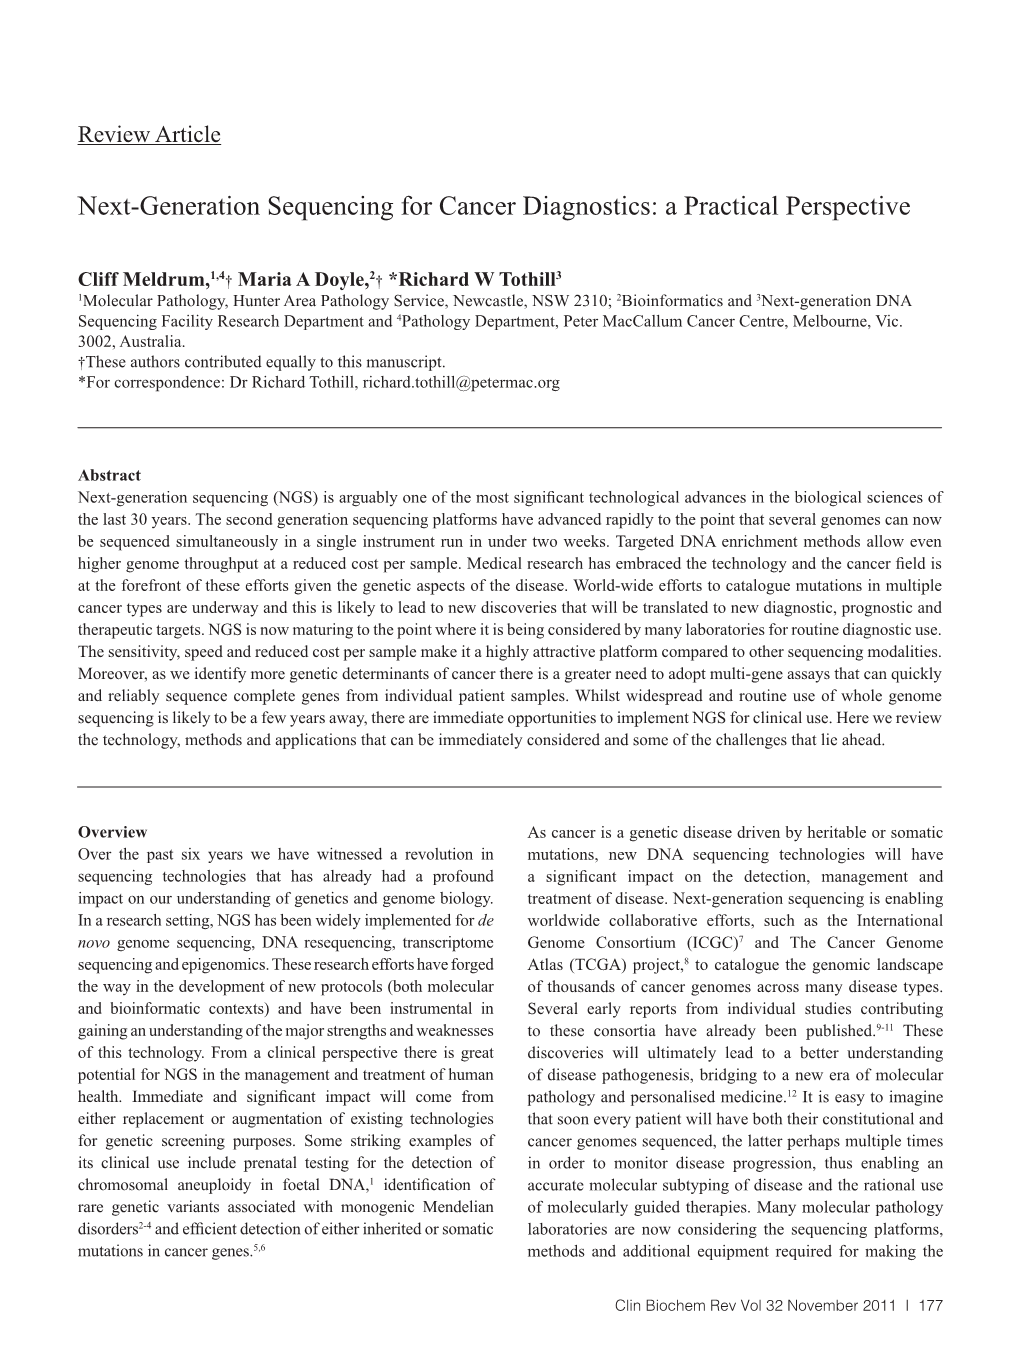 Next-Generation Sequencing for Cancer Diagnostics: a Practical Perspective